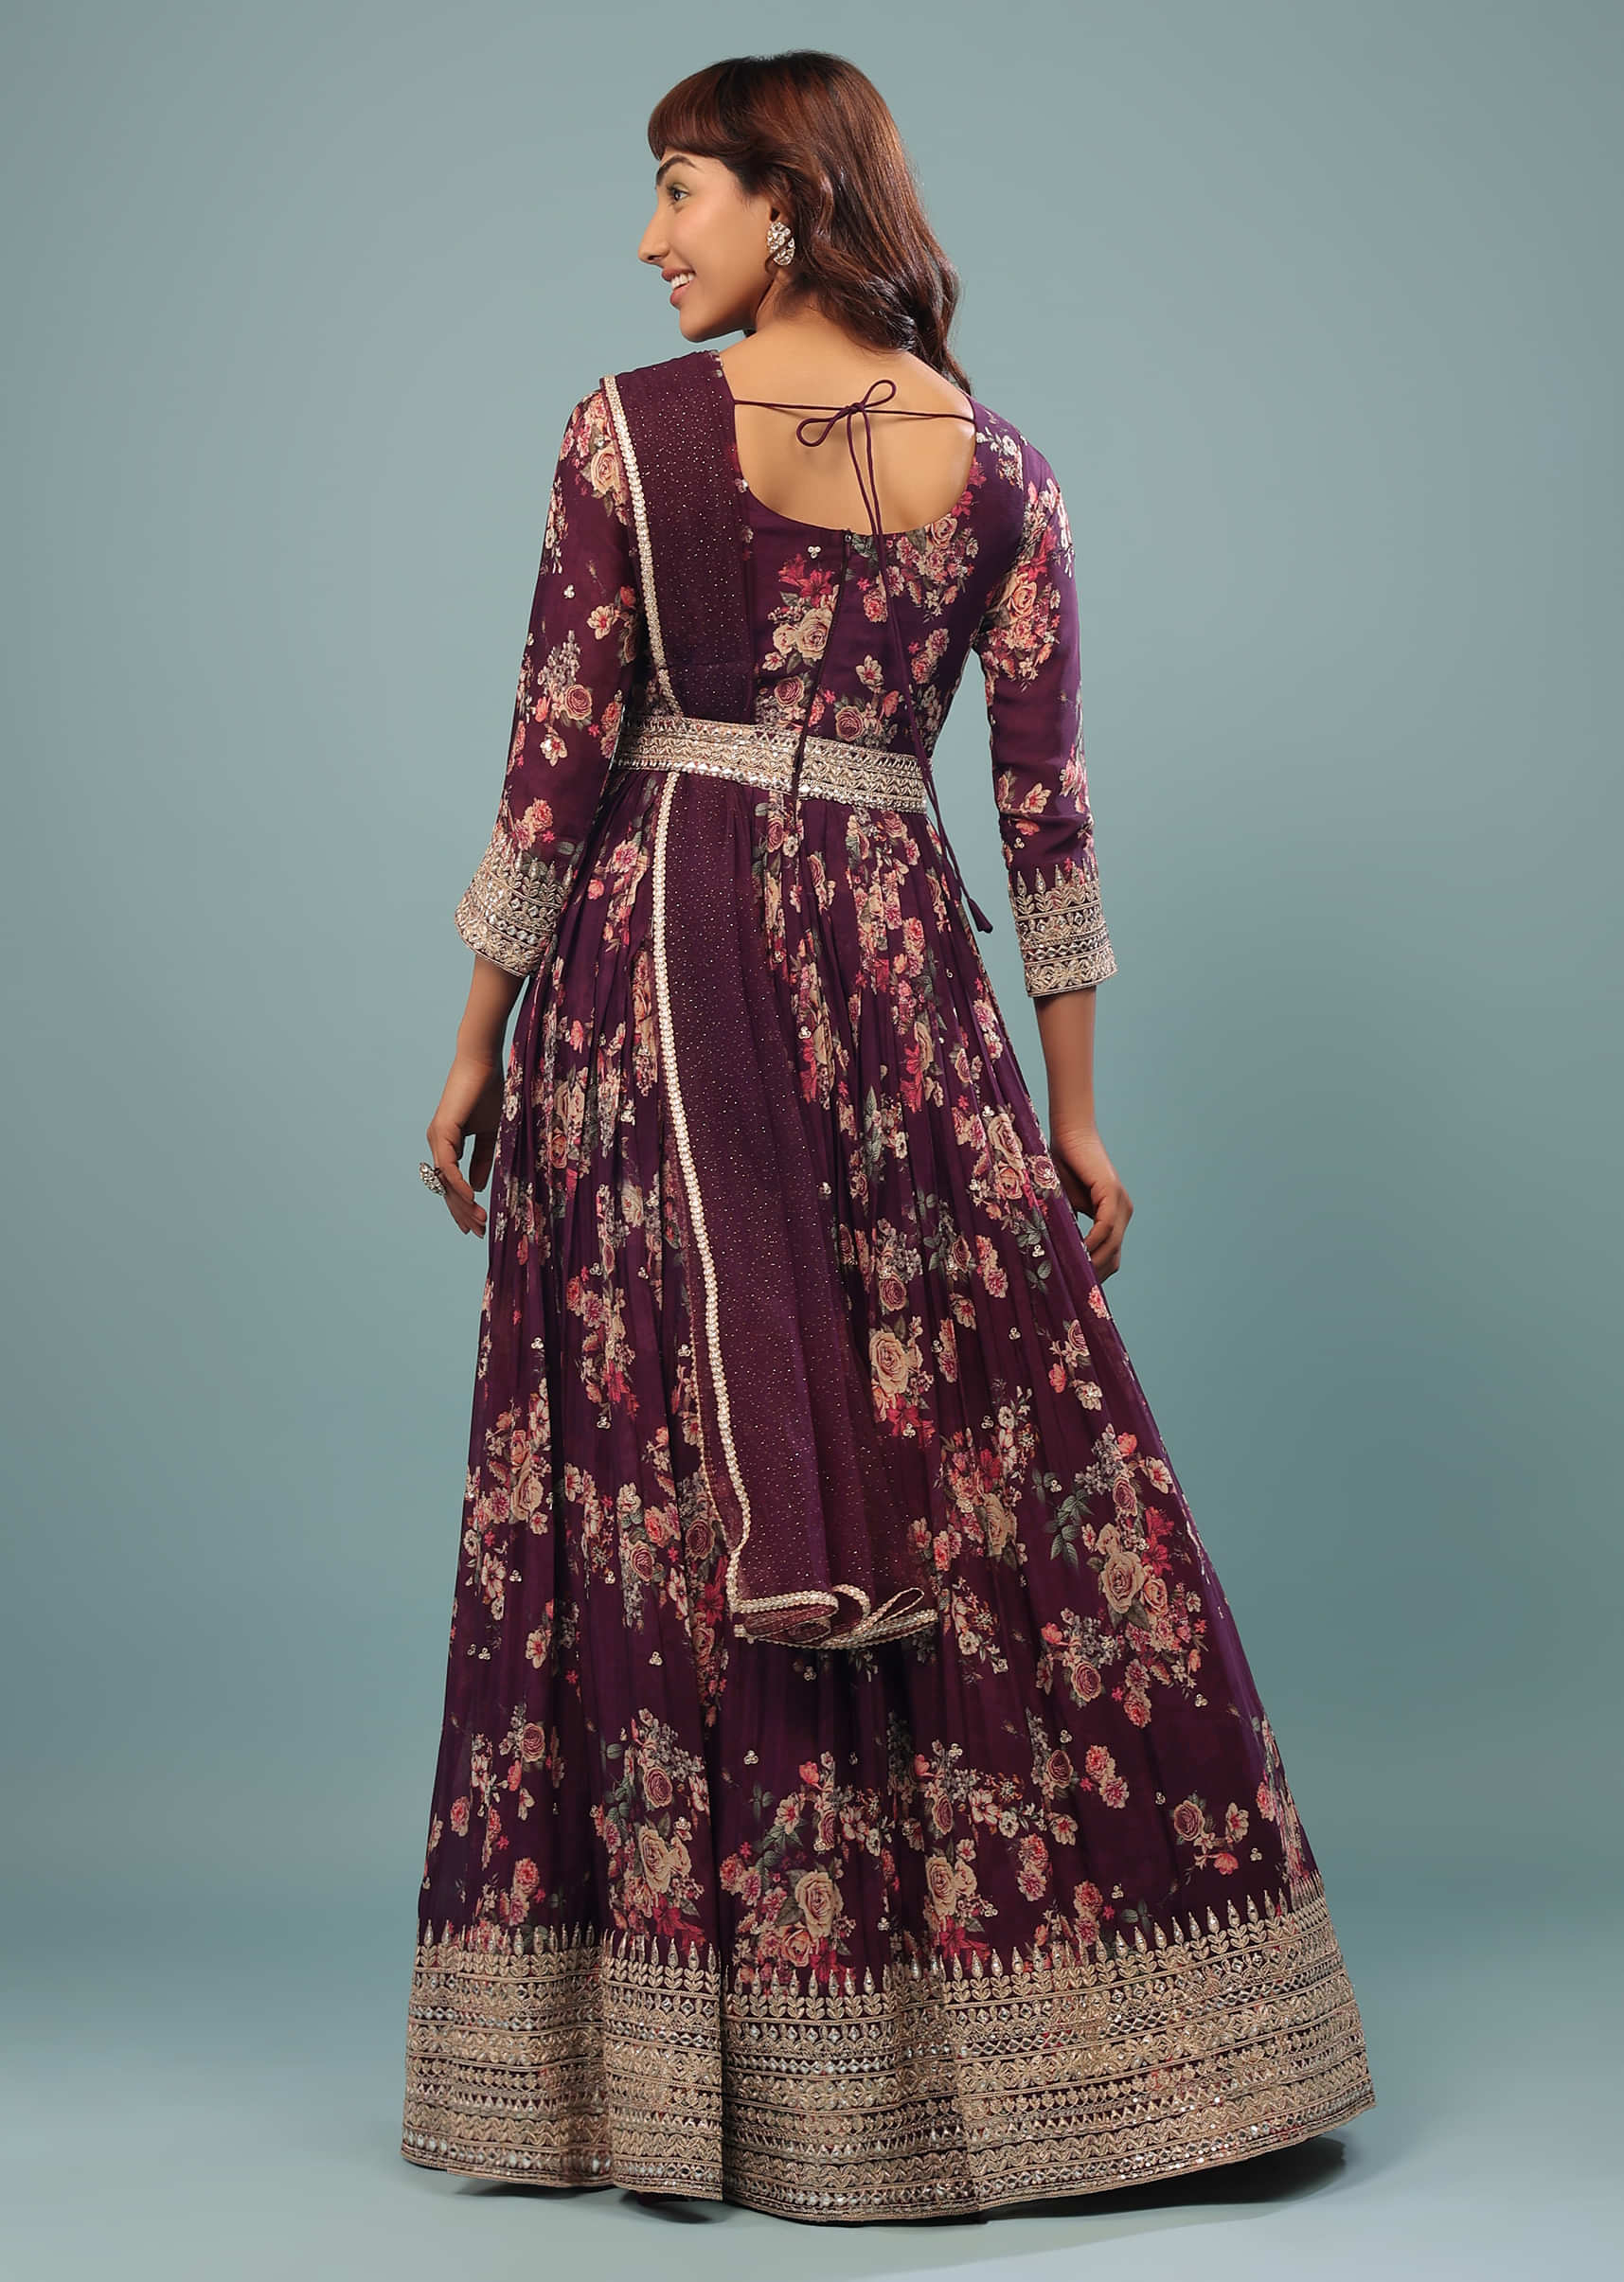 Plum Purple Embroidered Anarkali Suit With Vintage Floral Print In Georgette